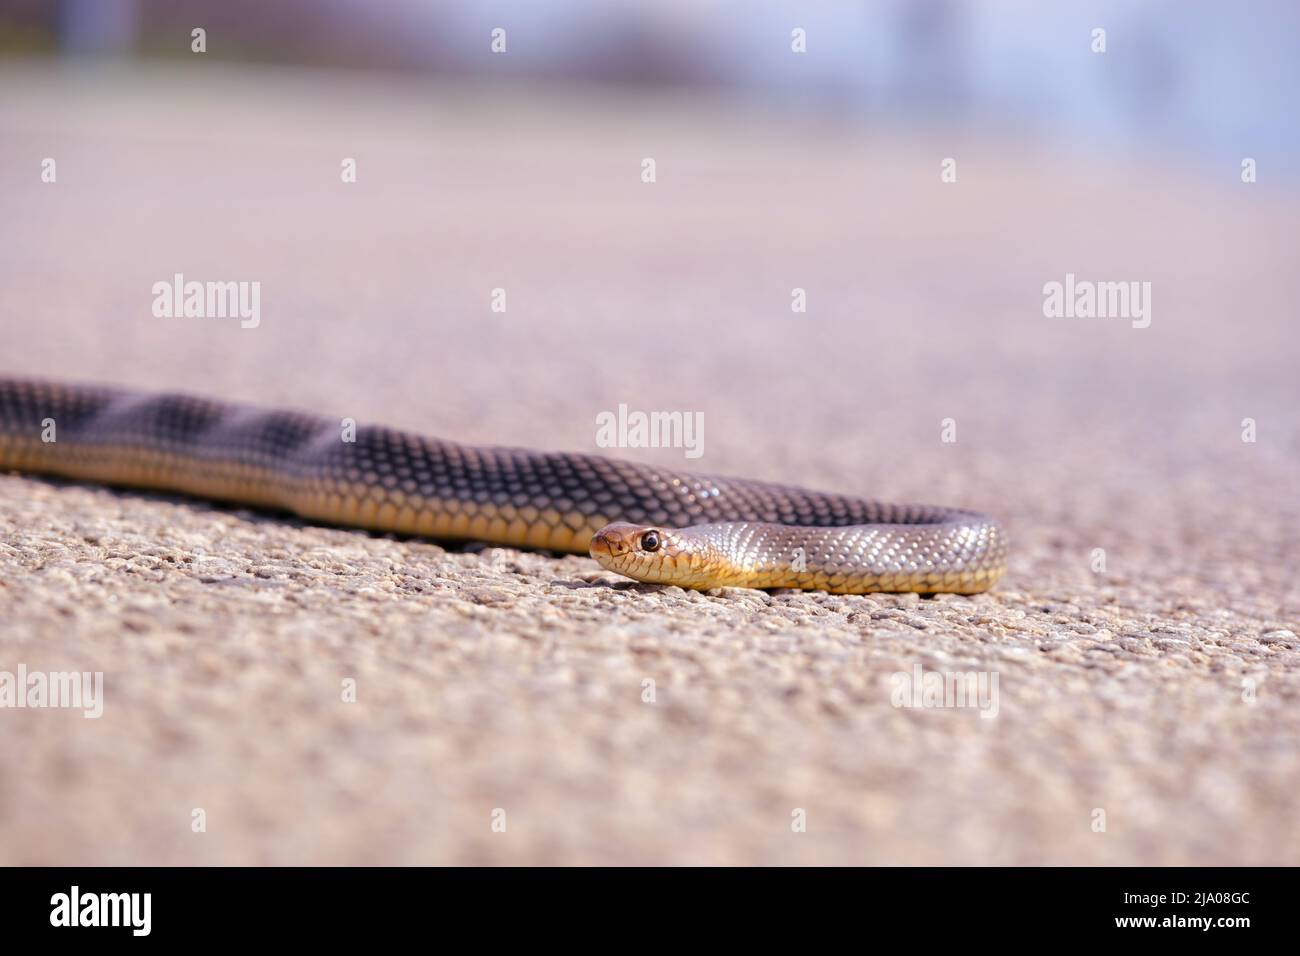 Brown snake crossing dirt road. Snake on the road. Stock Photo